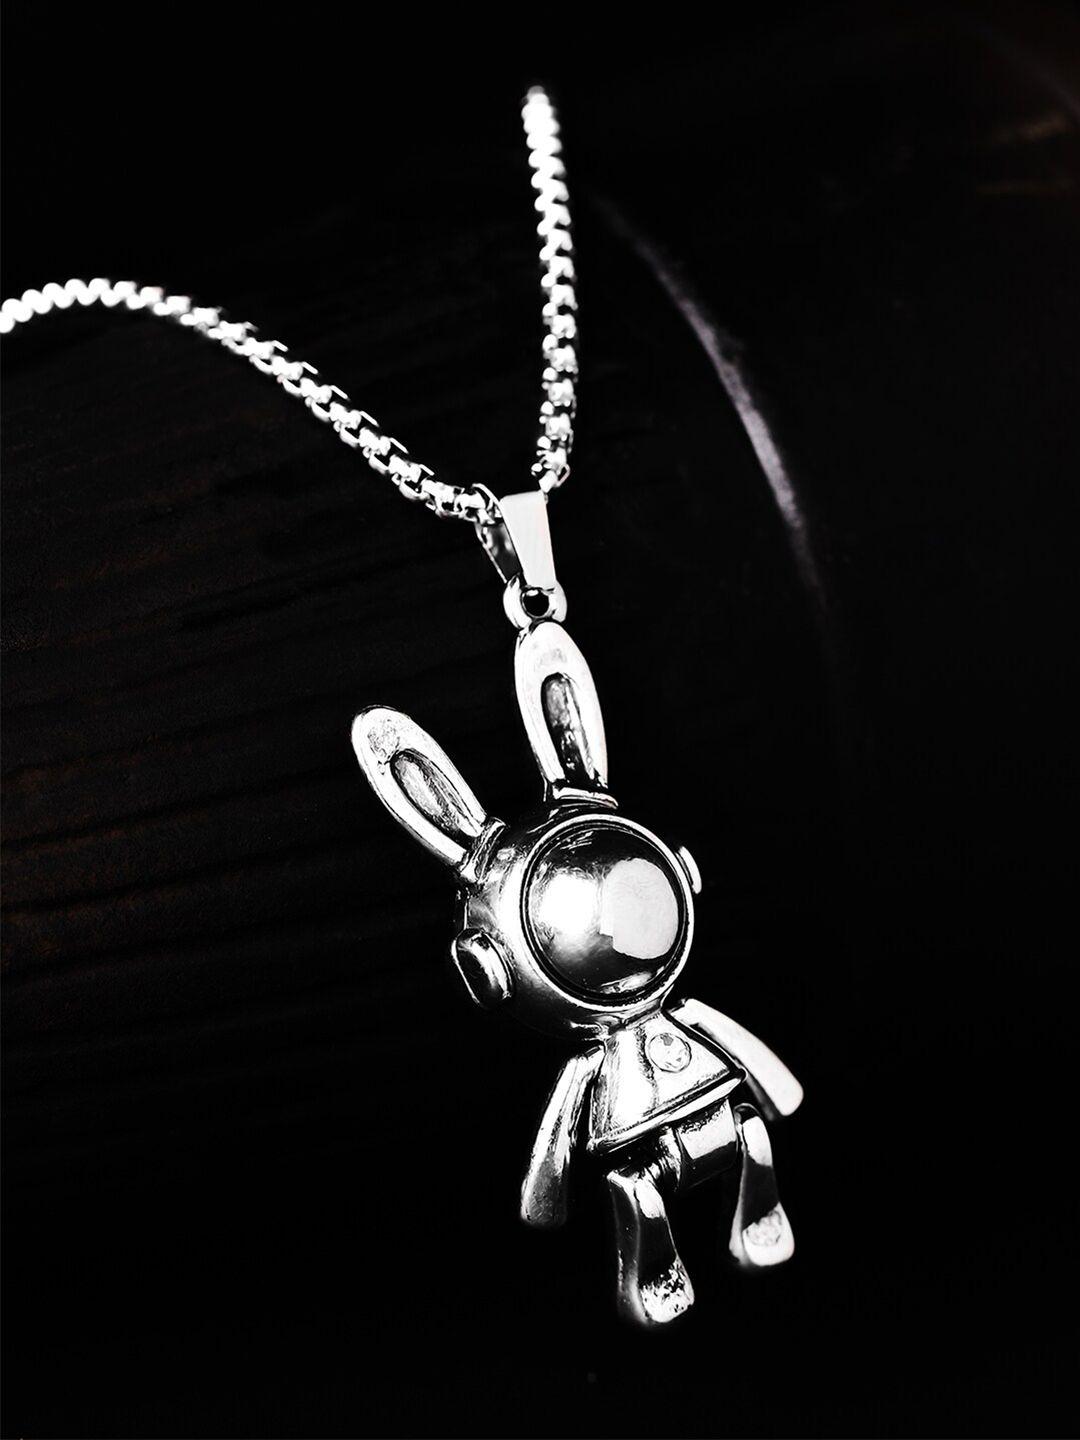 roadster silver-plated silver-toned pendant and chain